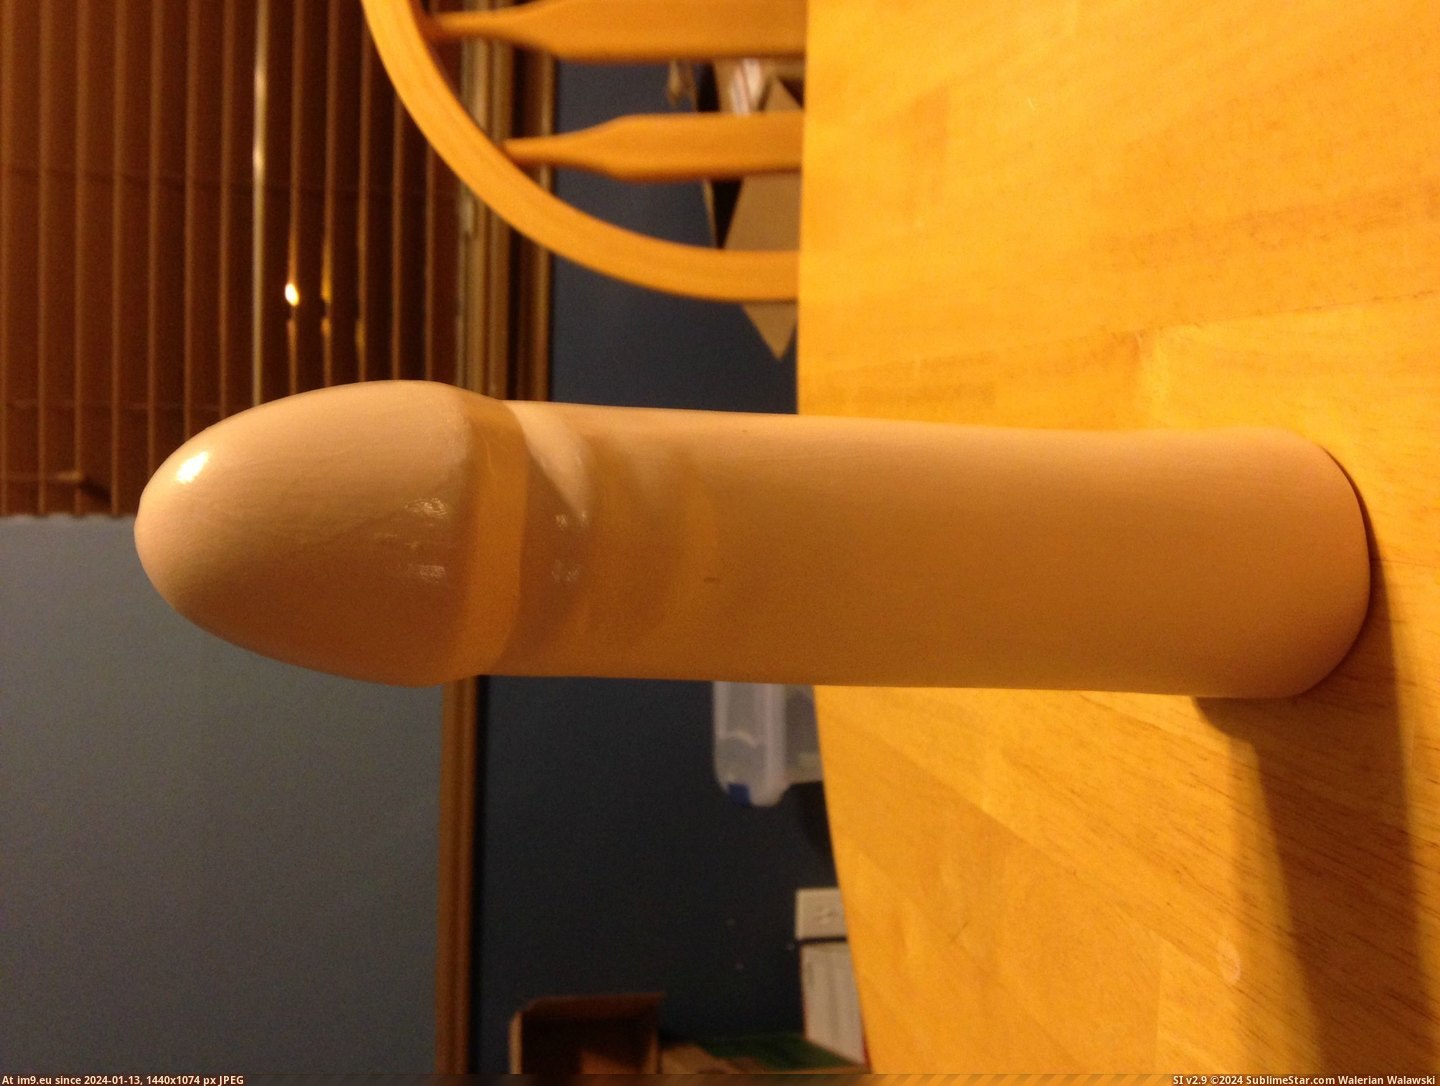 #Wtf #Art #Great #Out #Penis #Gave #Grandmother #Gifts #Got #She #Family #Boyfriend [Wtf] My Great-Grandmother got a boyfriend...so she made this penis art and gave it out as gifts to the family. [NSFW] 3 Pic. (Изображение из альбом My r/WTF favs))